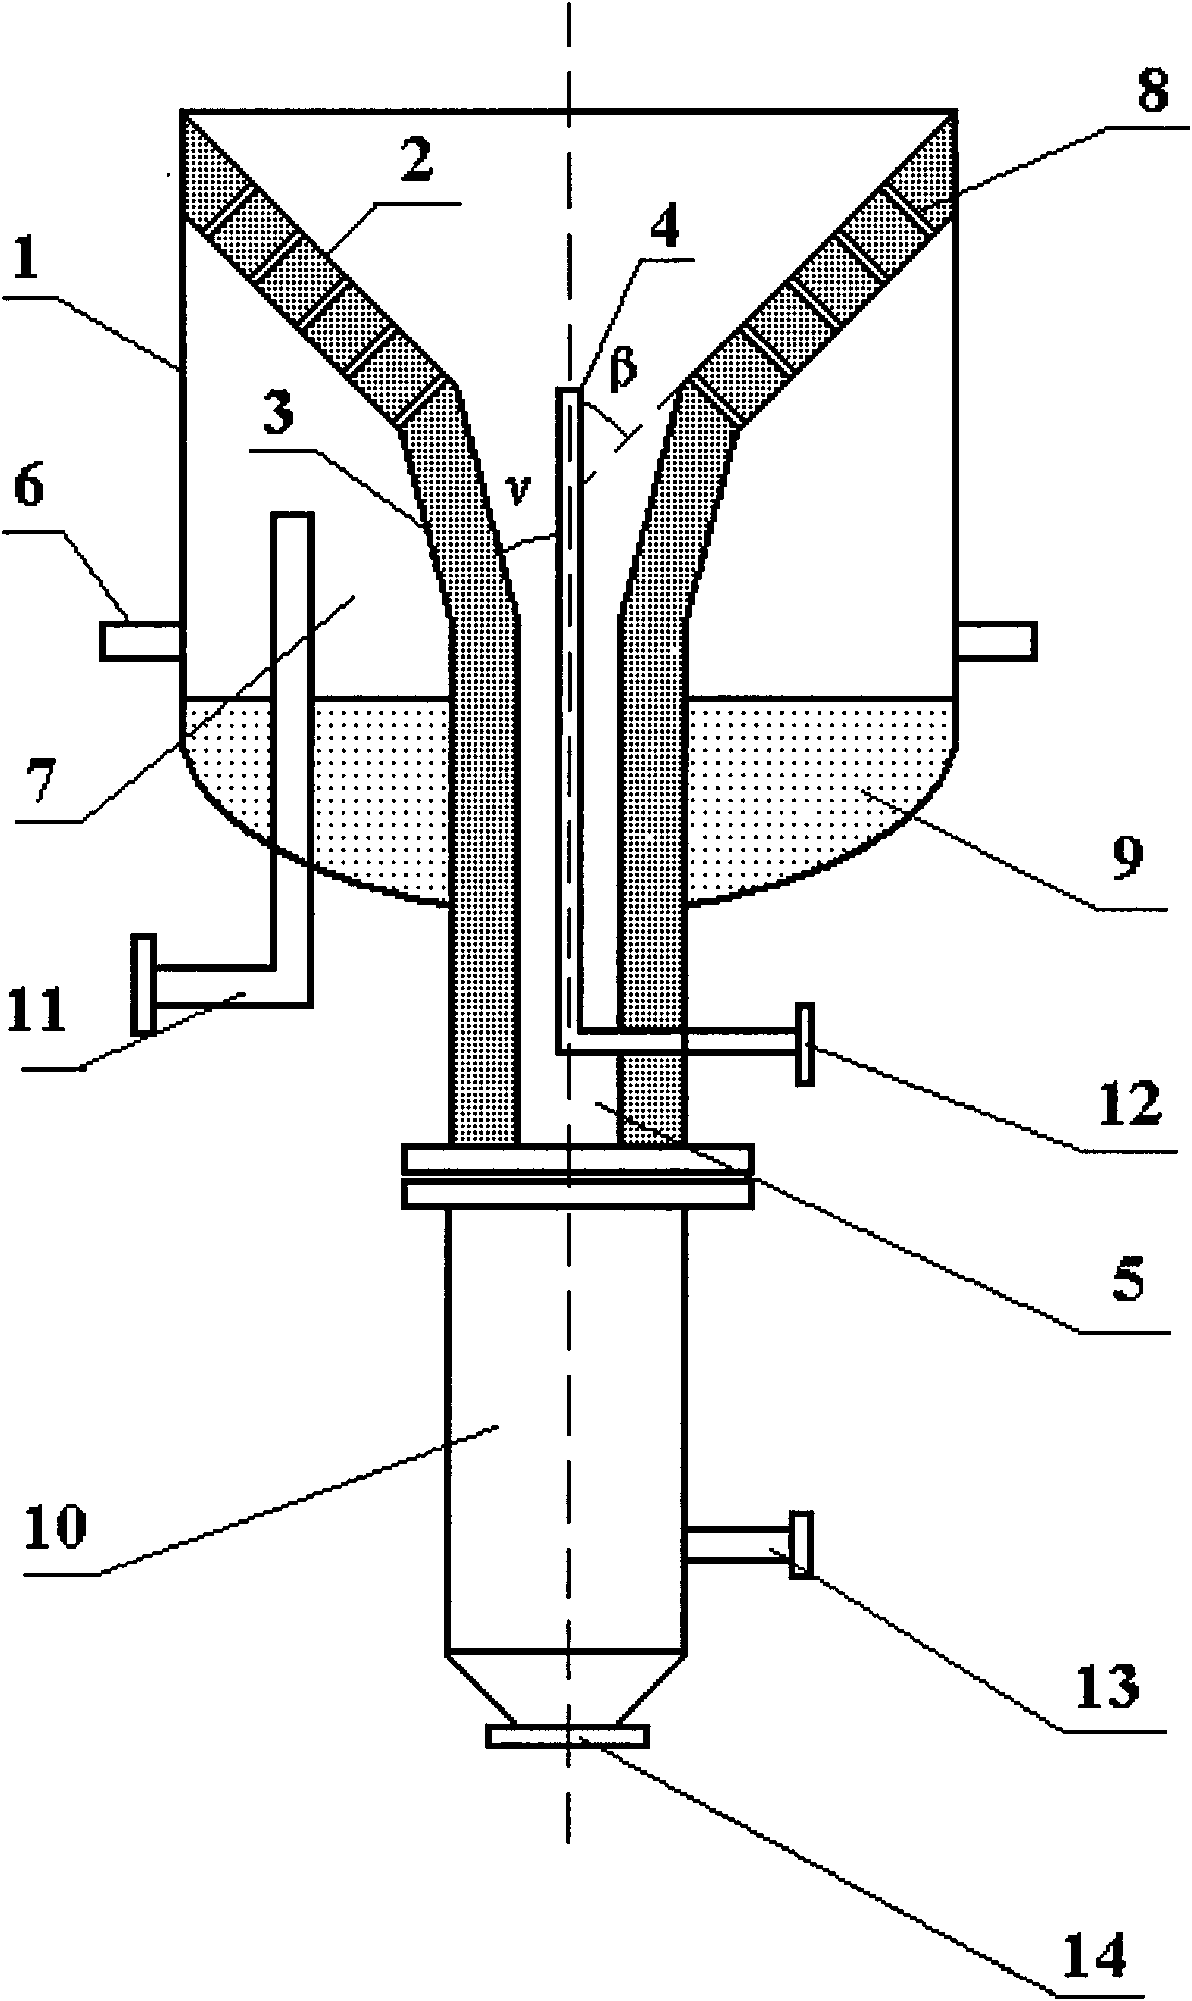 Method and device for gasifying multi-segment staged converted fluidized bed